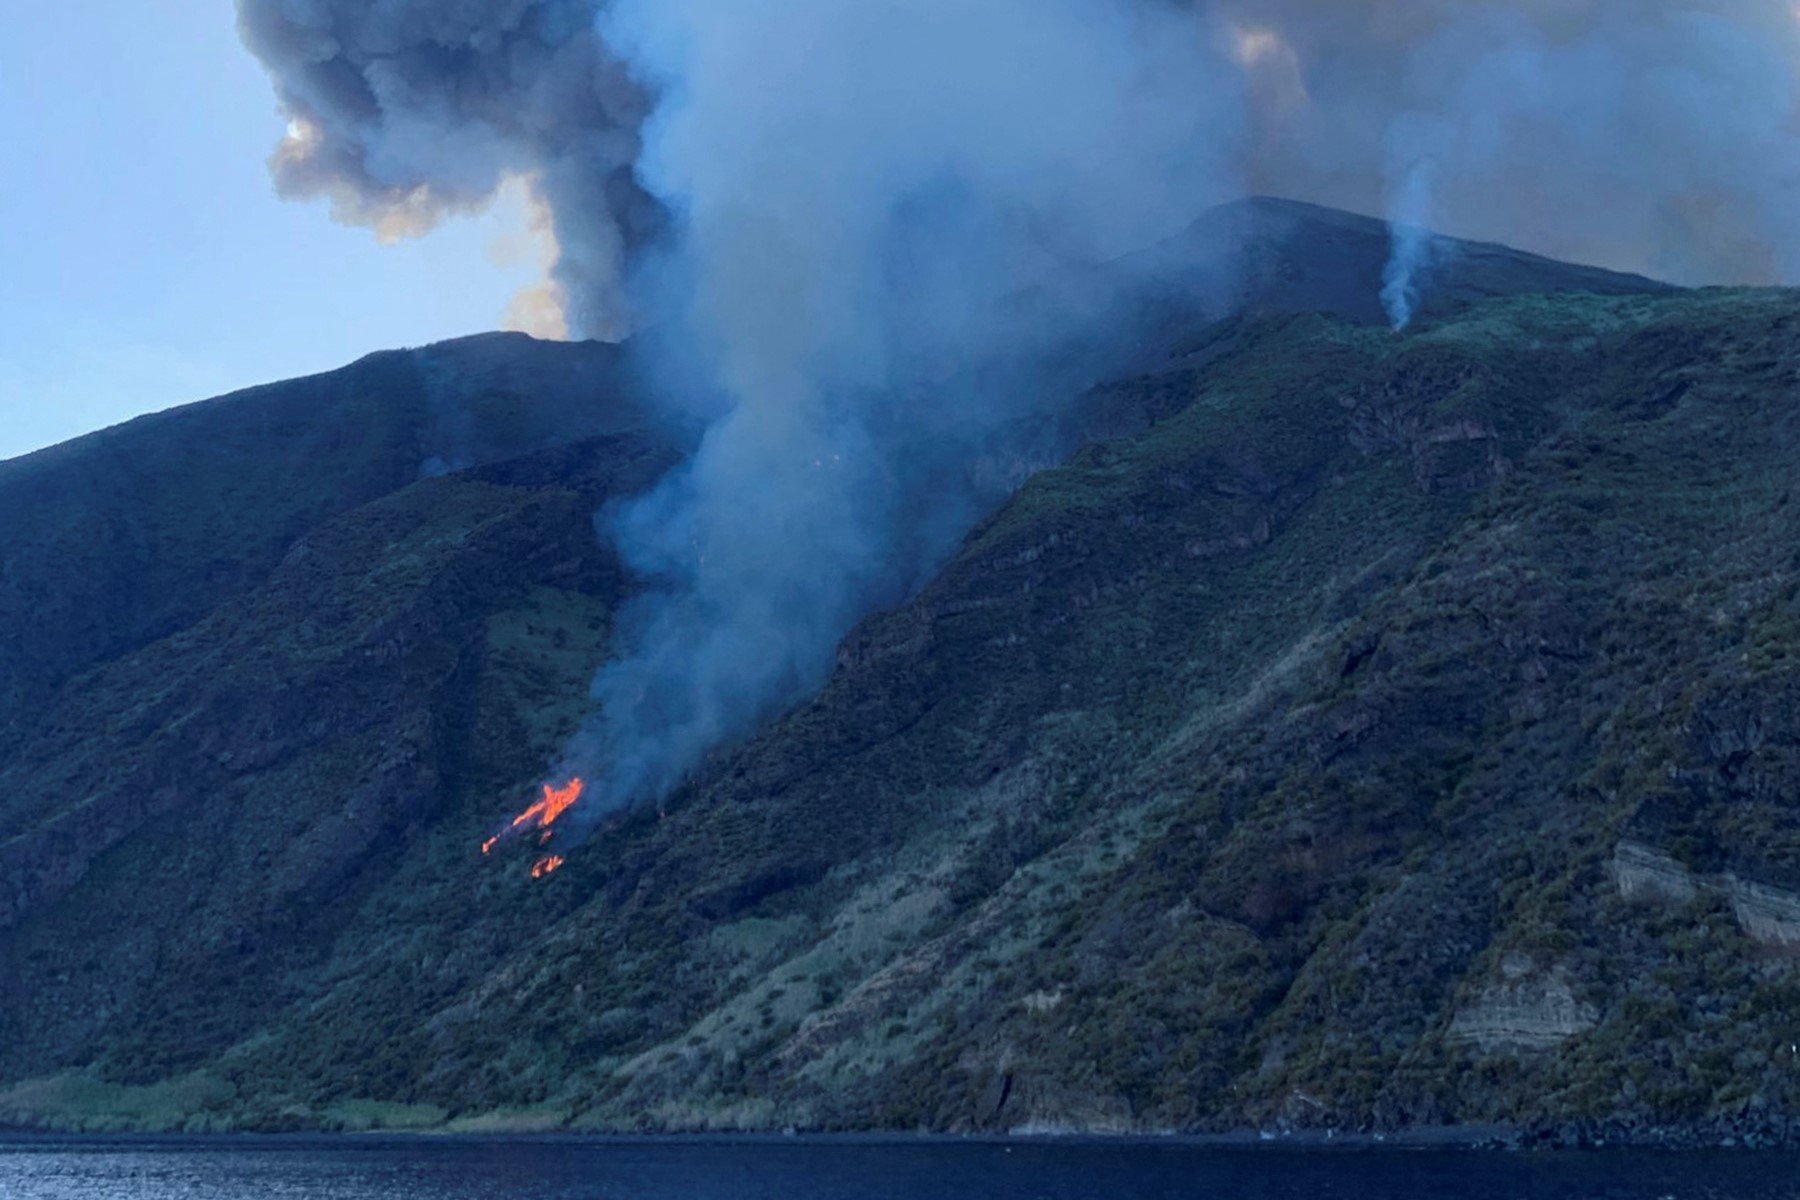 View of the eruption of the Stromboli volcano in July 2019 on the Stromboli island